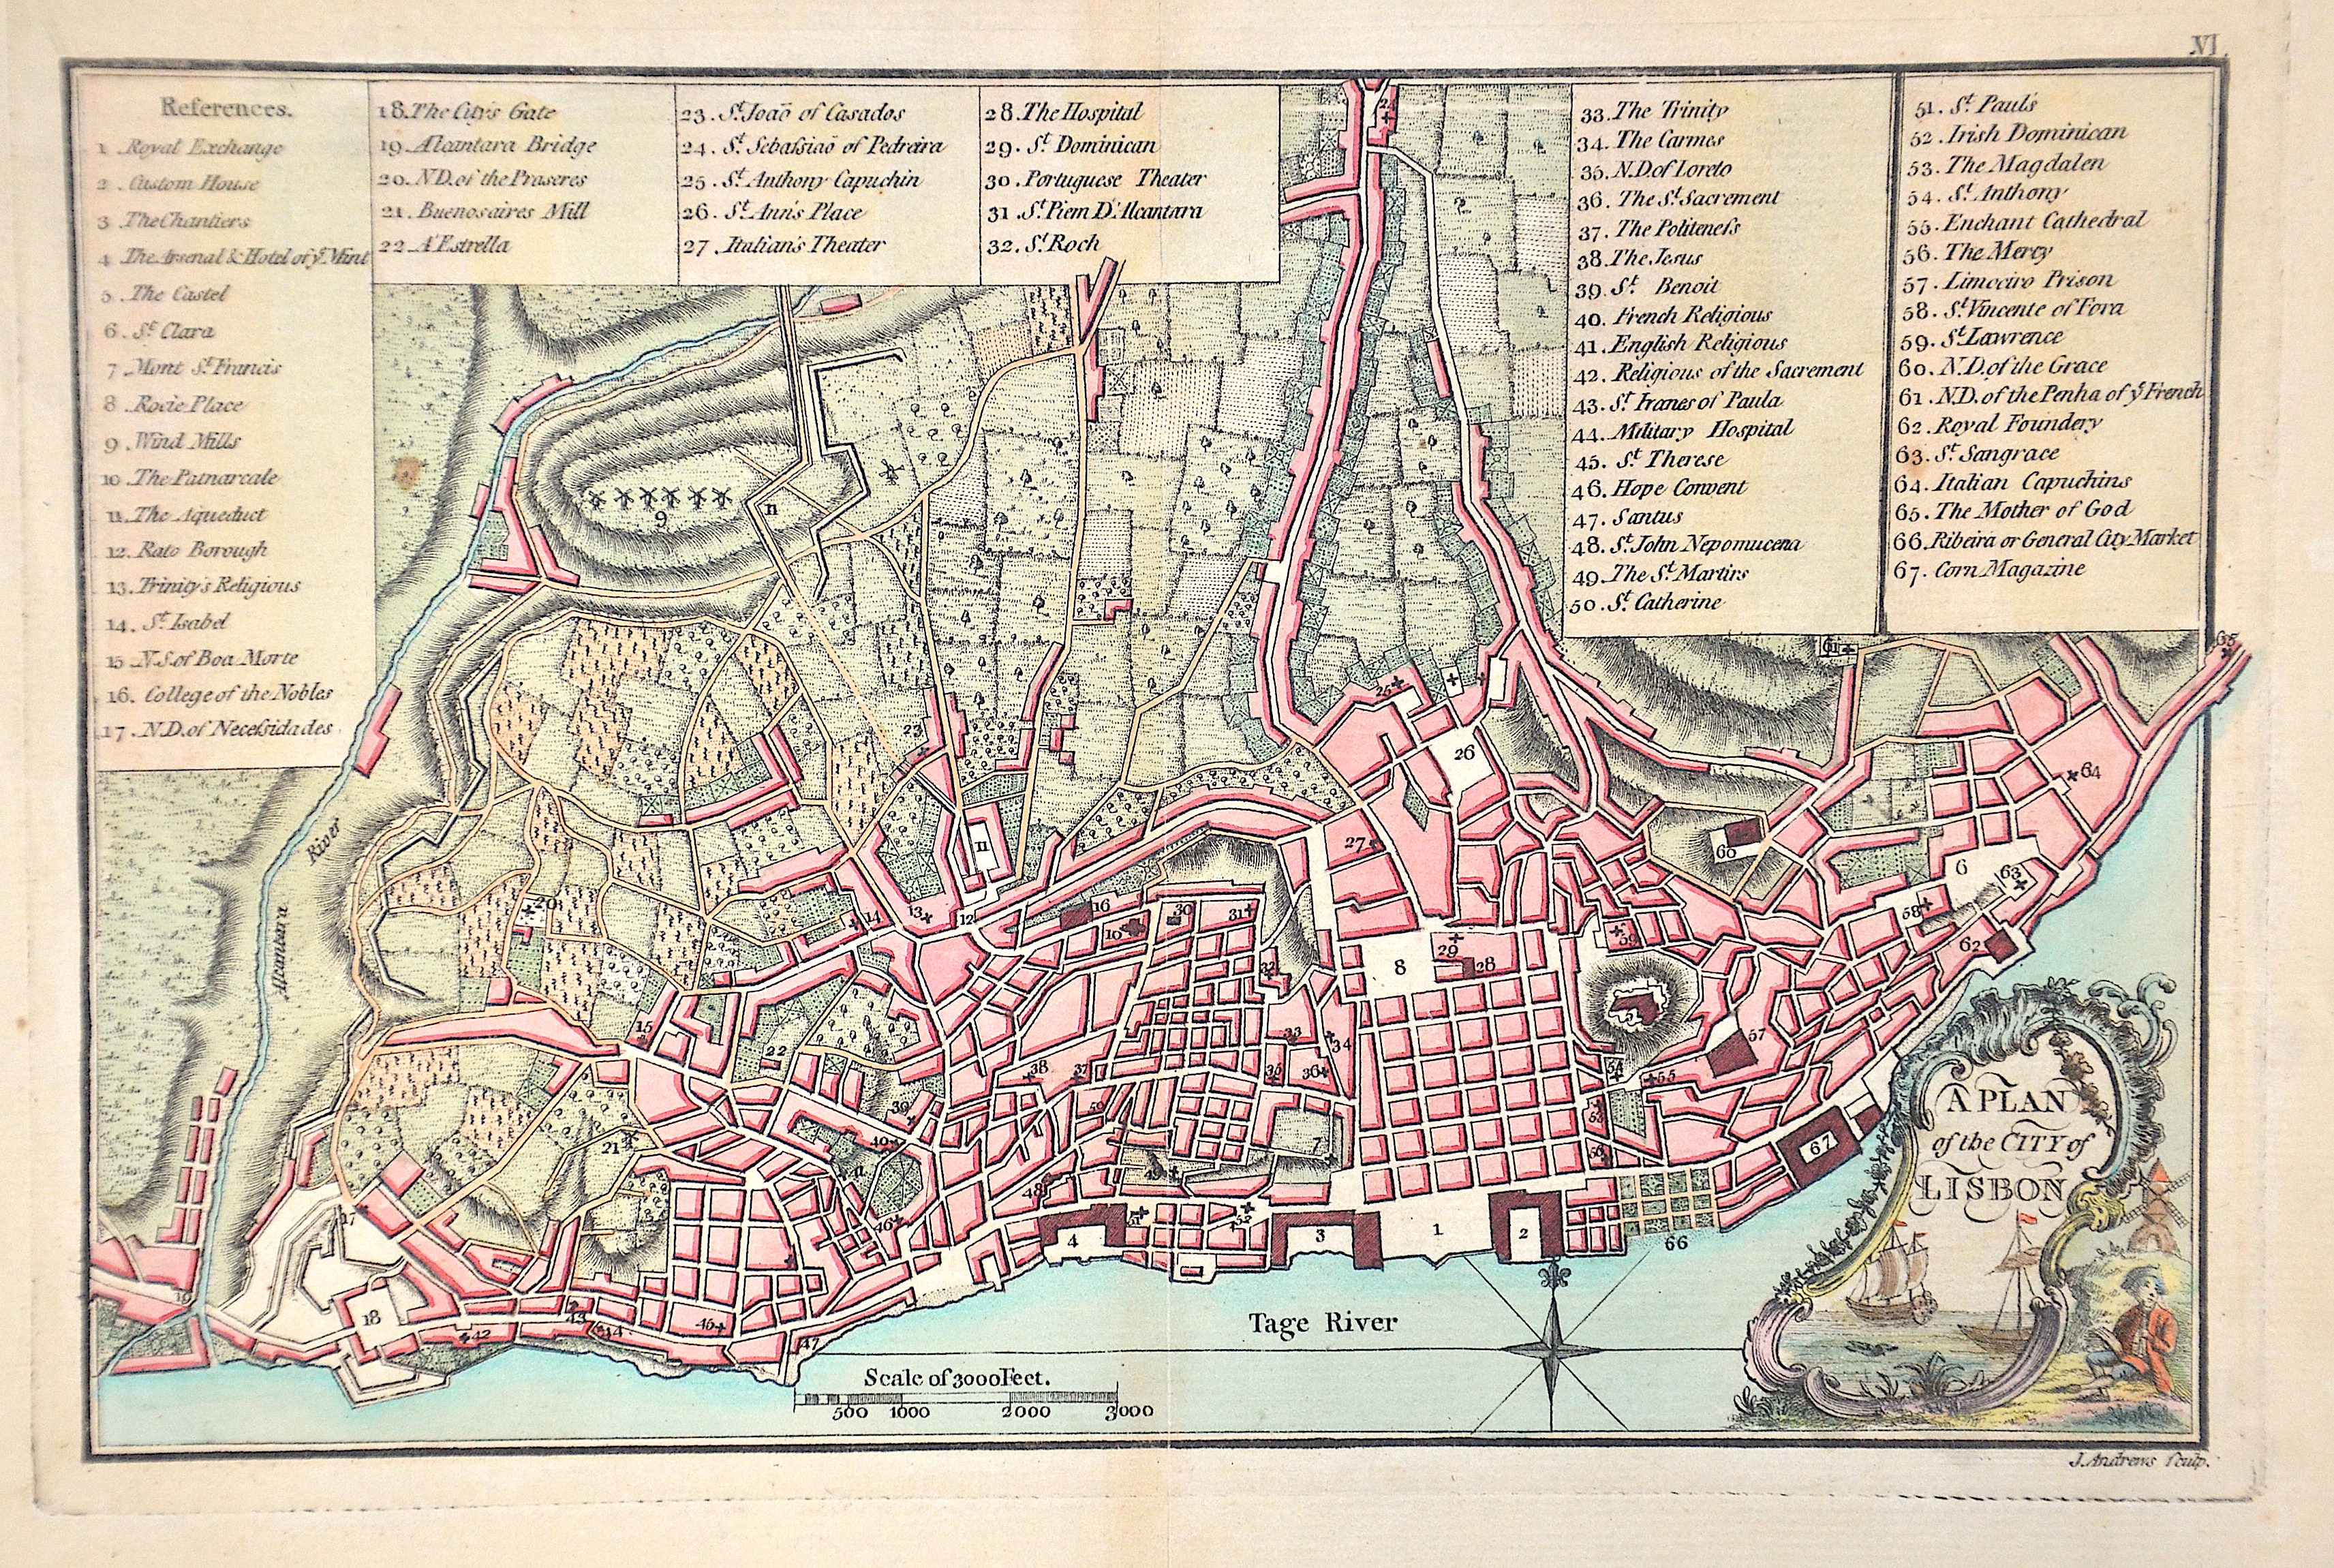 Andrews  A Plan of the City of Lisbon